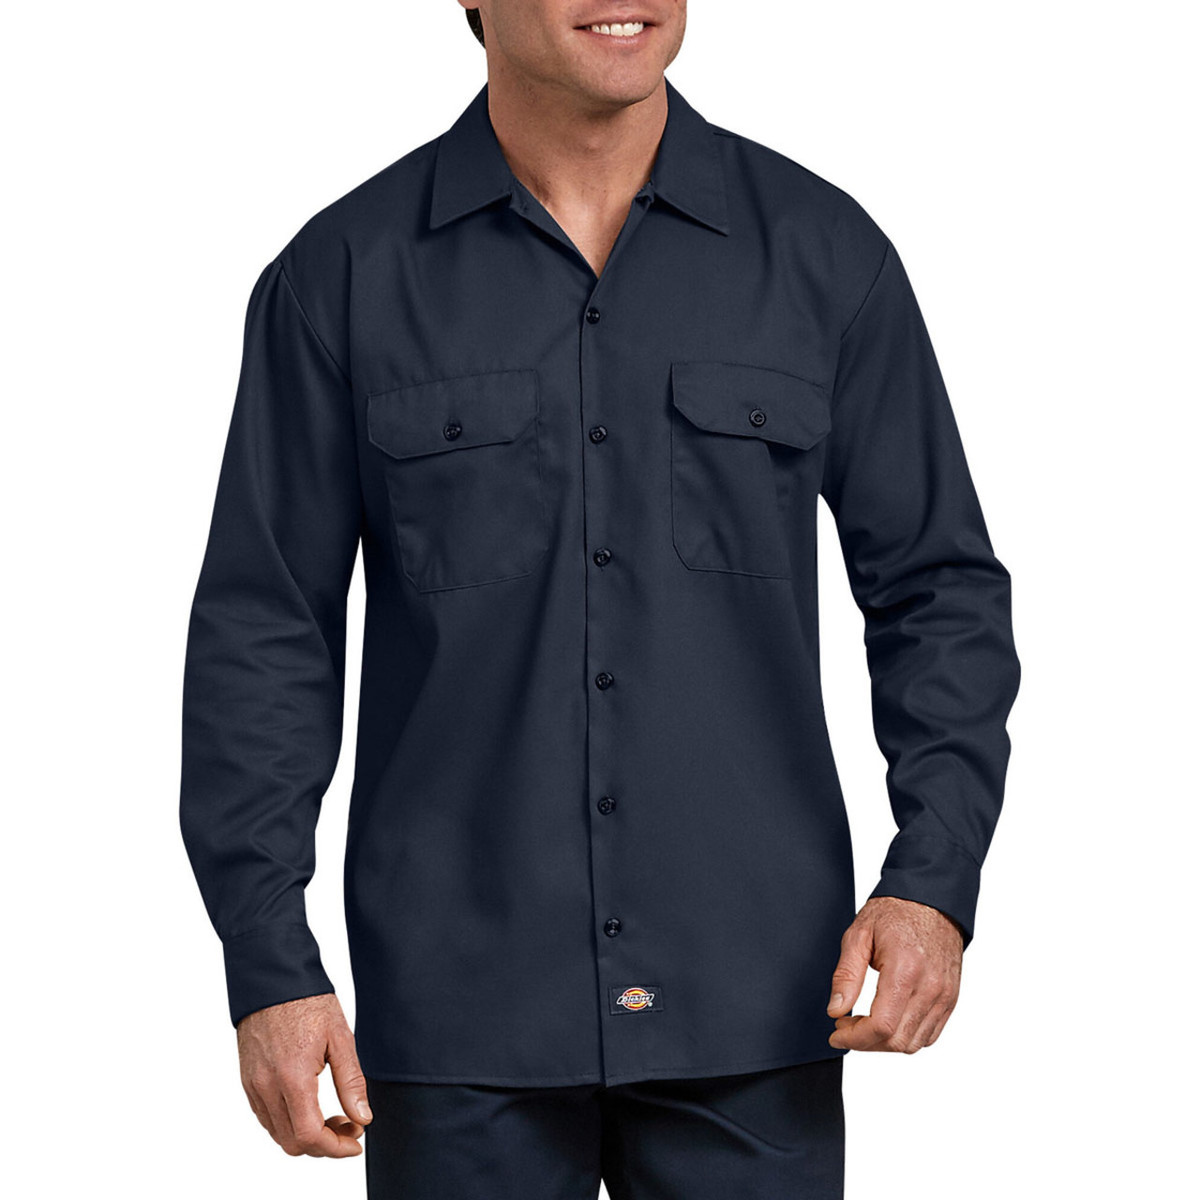 Dickies Men's Relaxed Fit Short Sleeve Collared Cotton Polyester Work Shirt - 1 Each